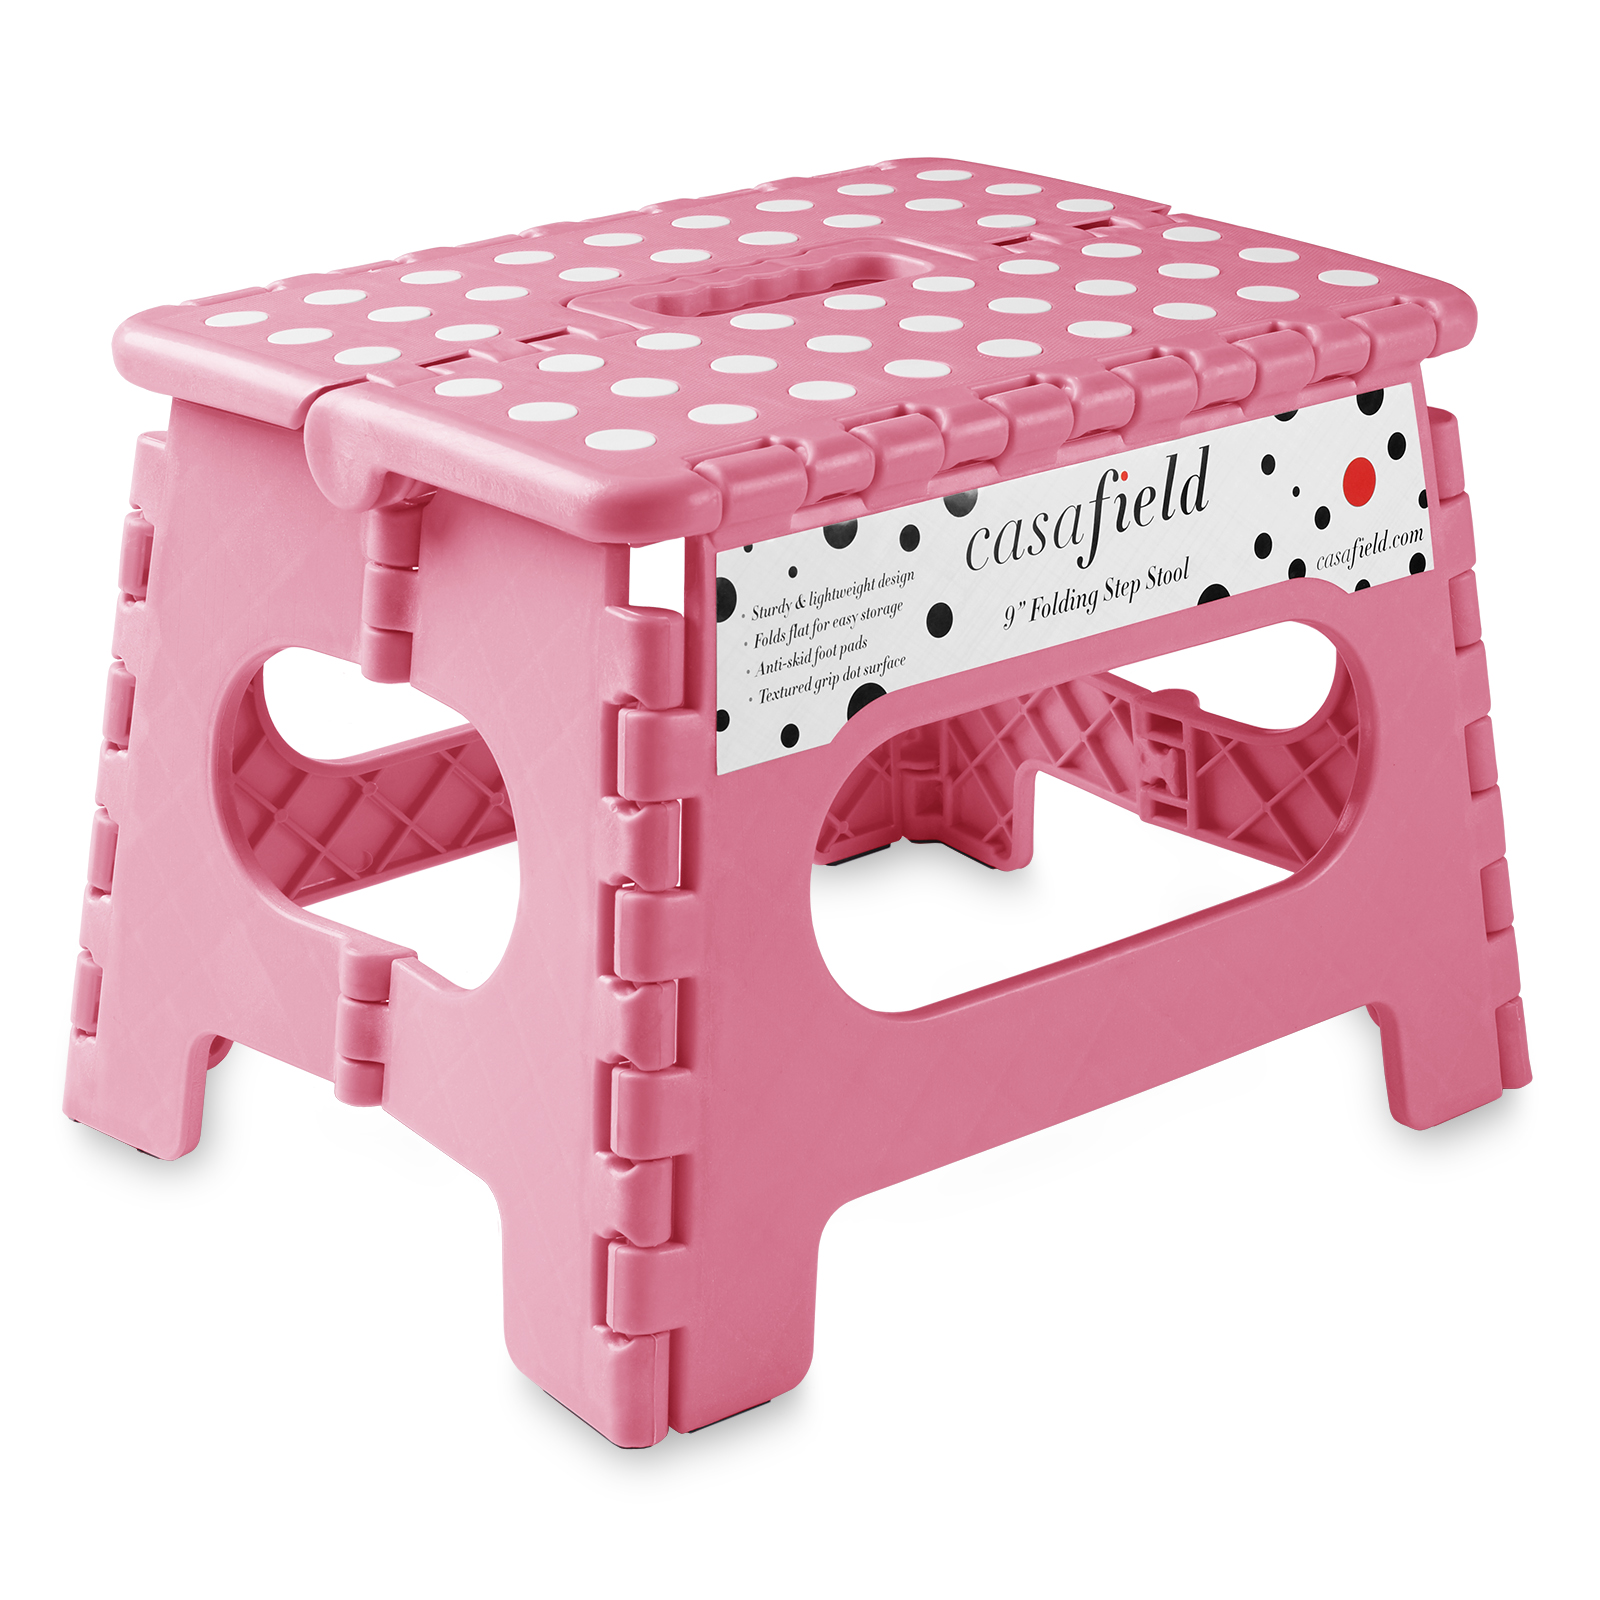 Casafield 9" Folding Step Stool with Handle - image 1 of 7